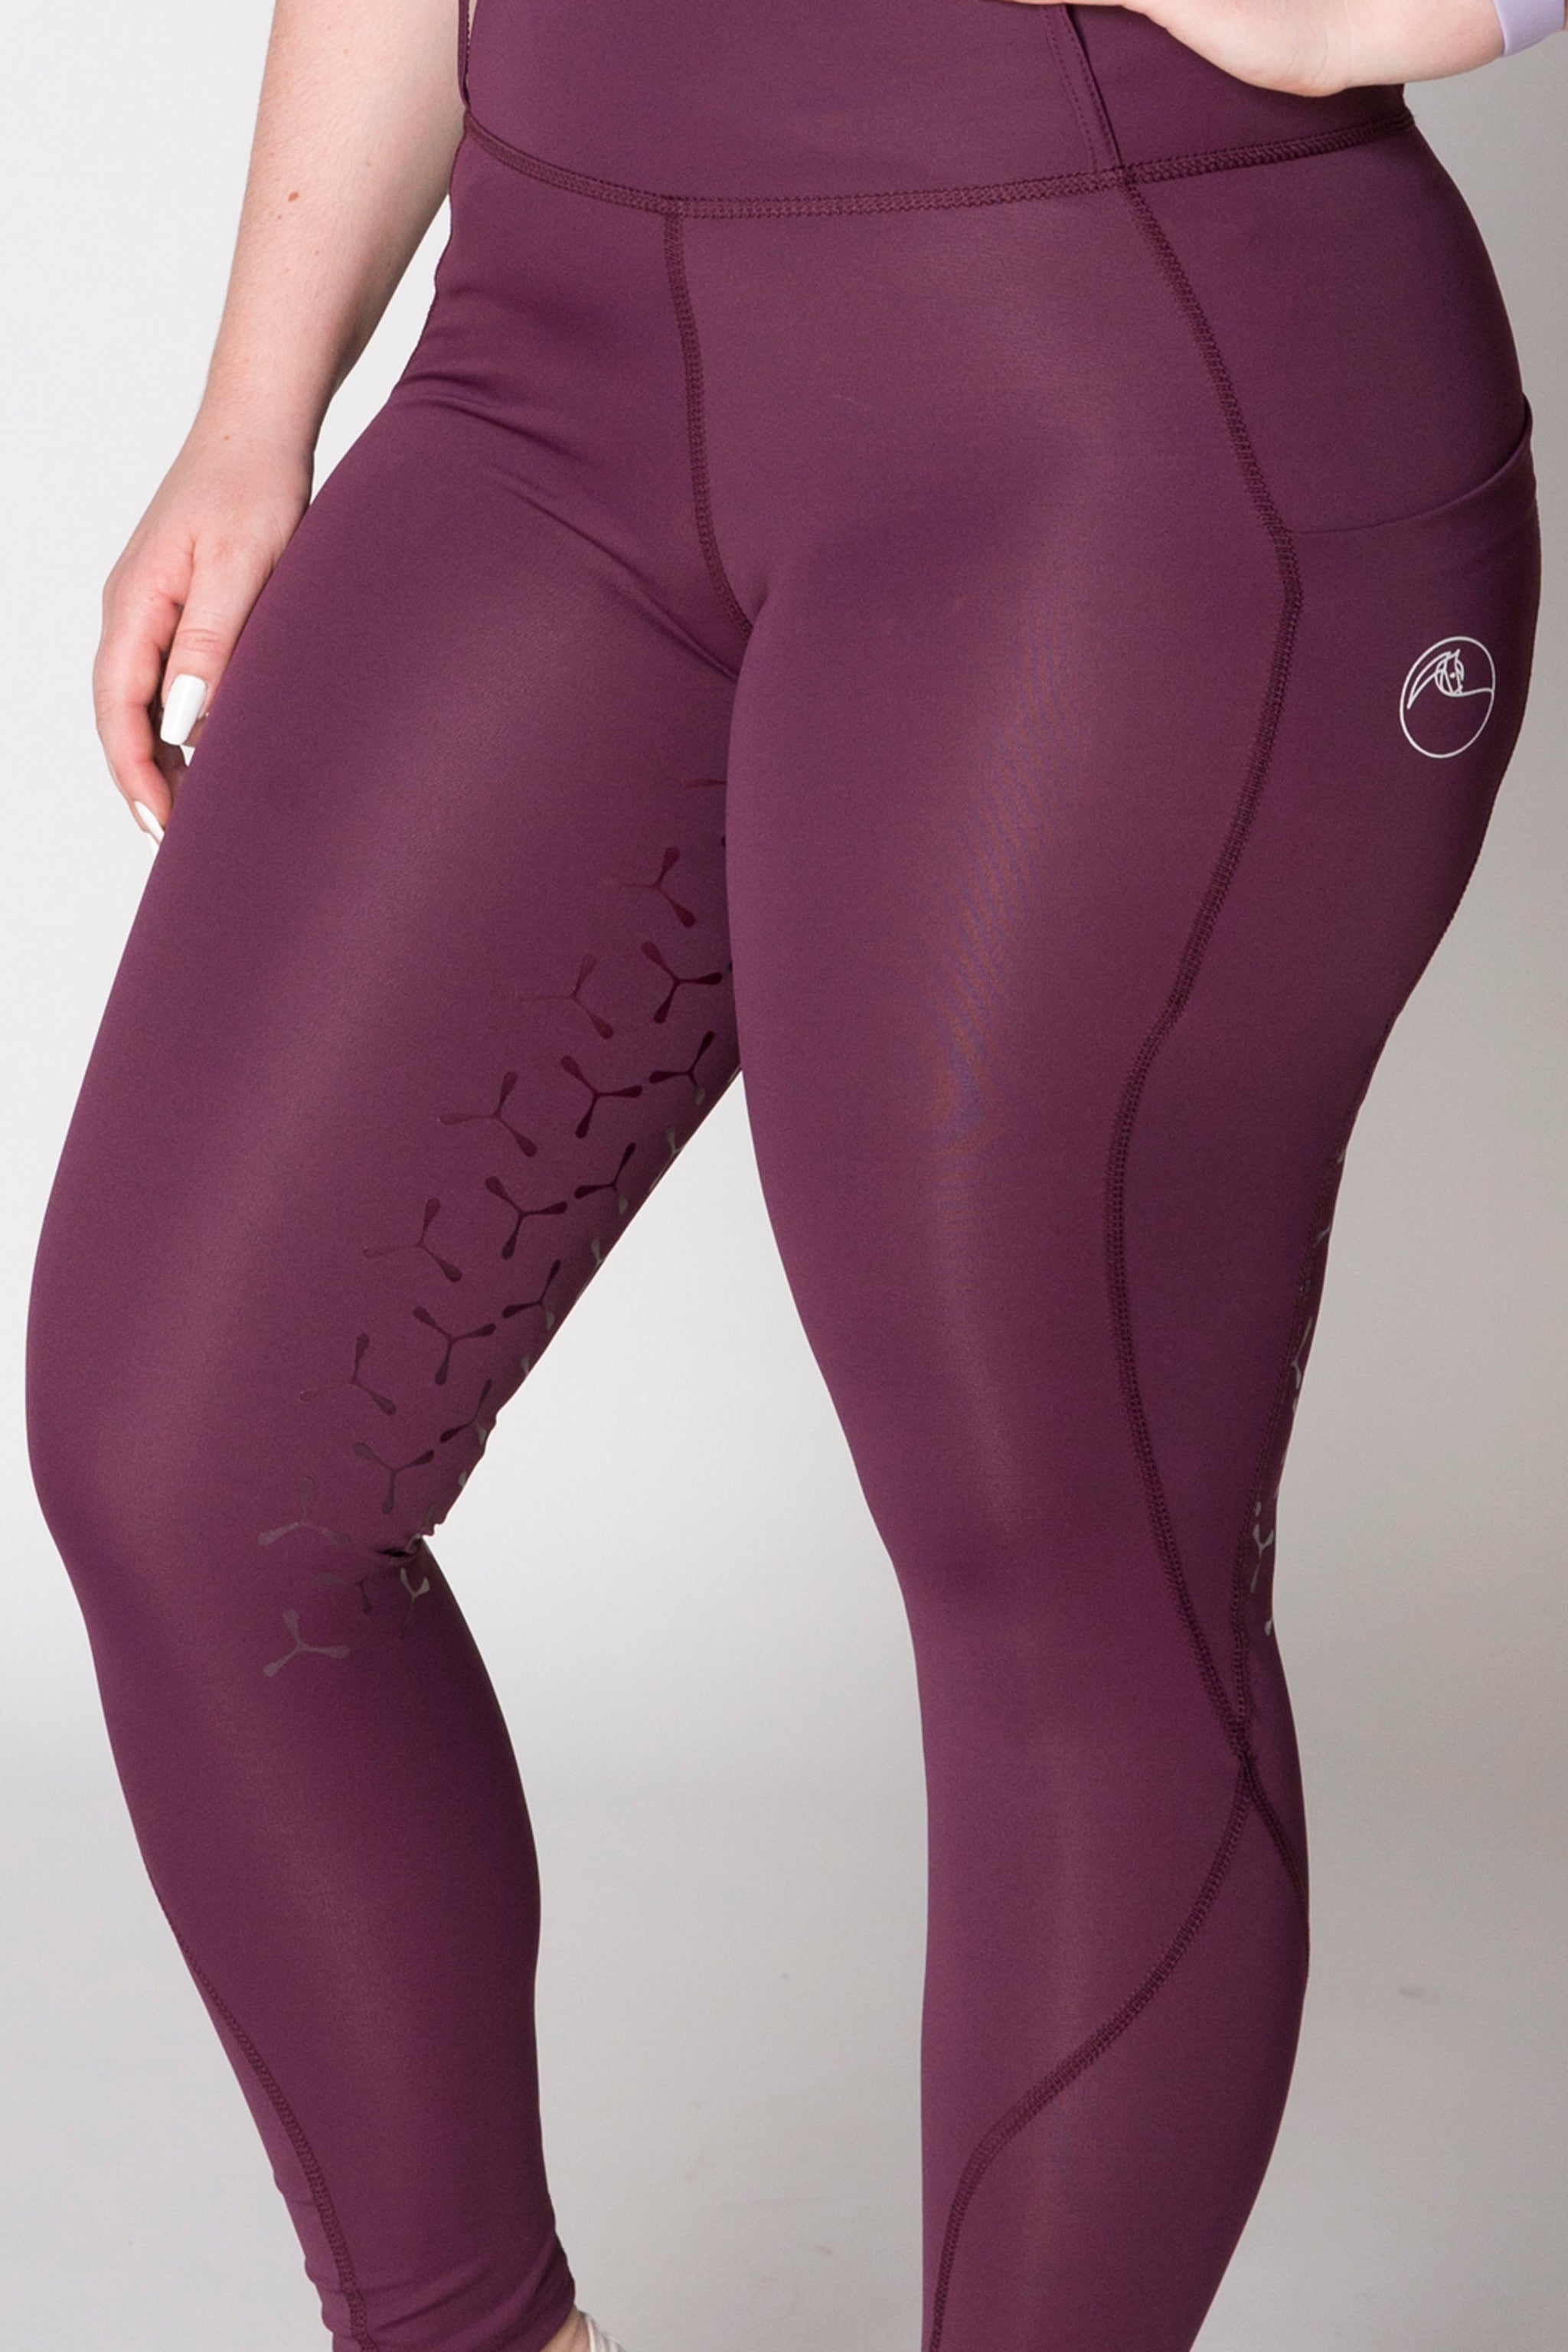 Ankle Length (Double Pocket) Tights - MAUVE PINK